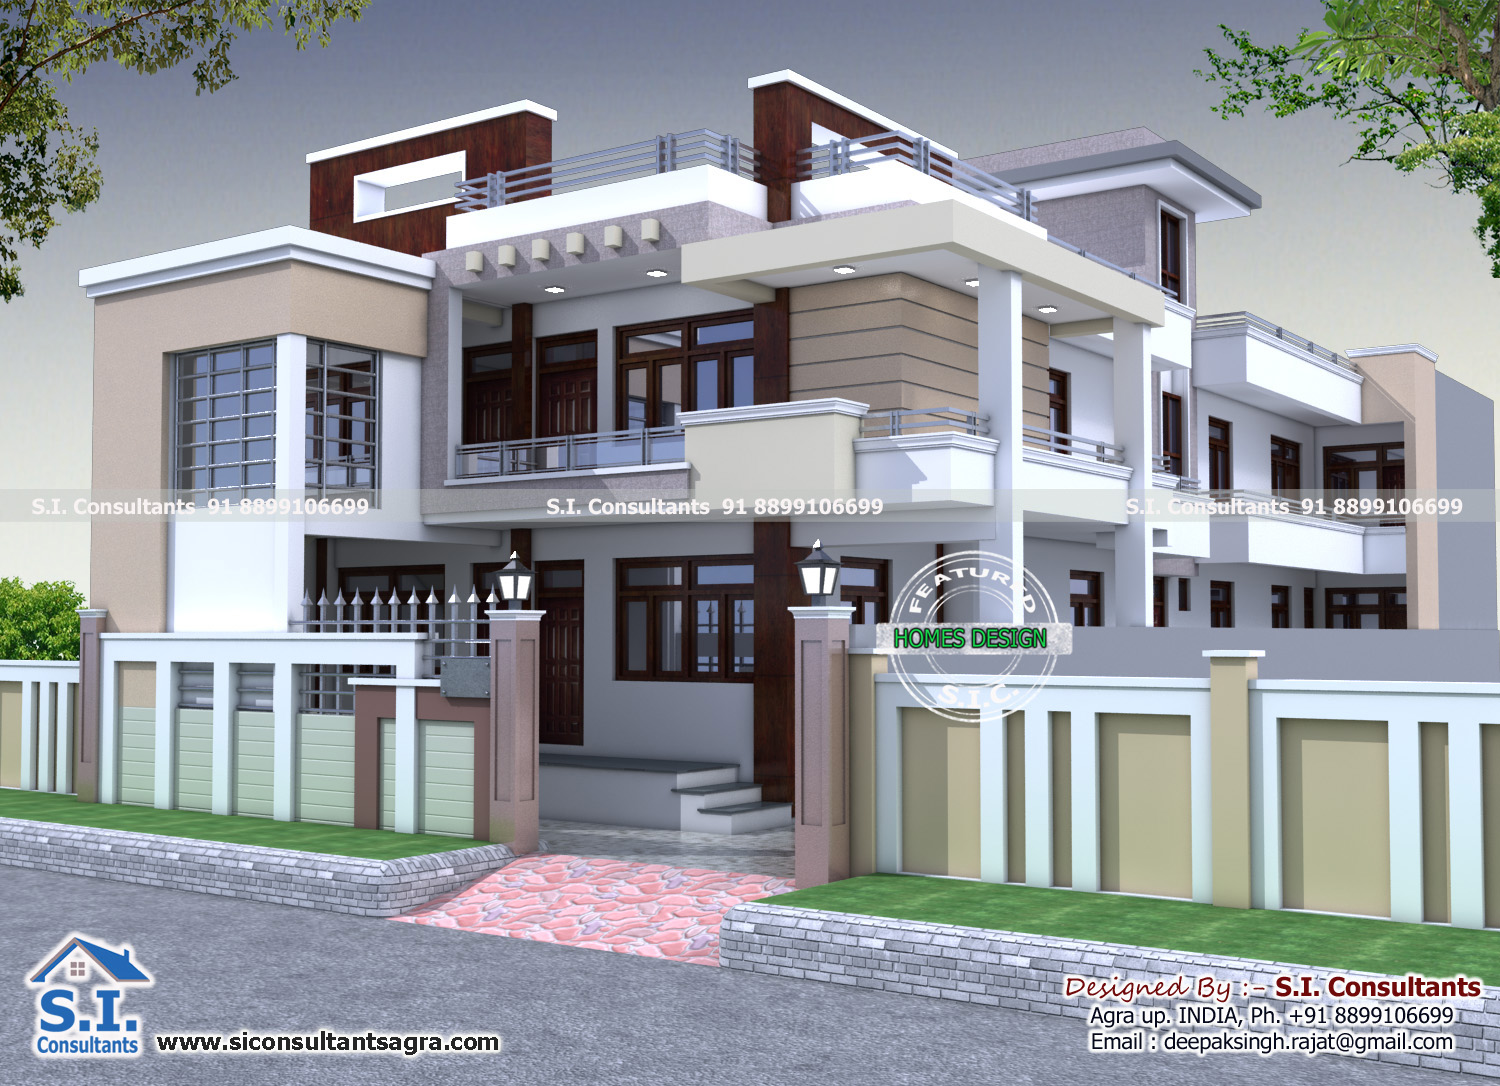 S.I. consultants: 40x70 Indian House Design